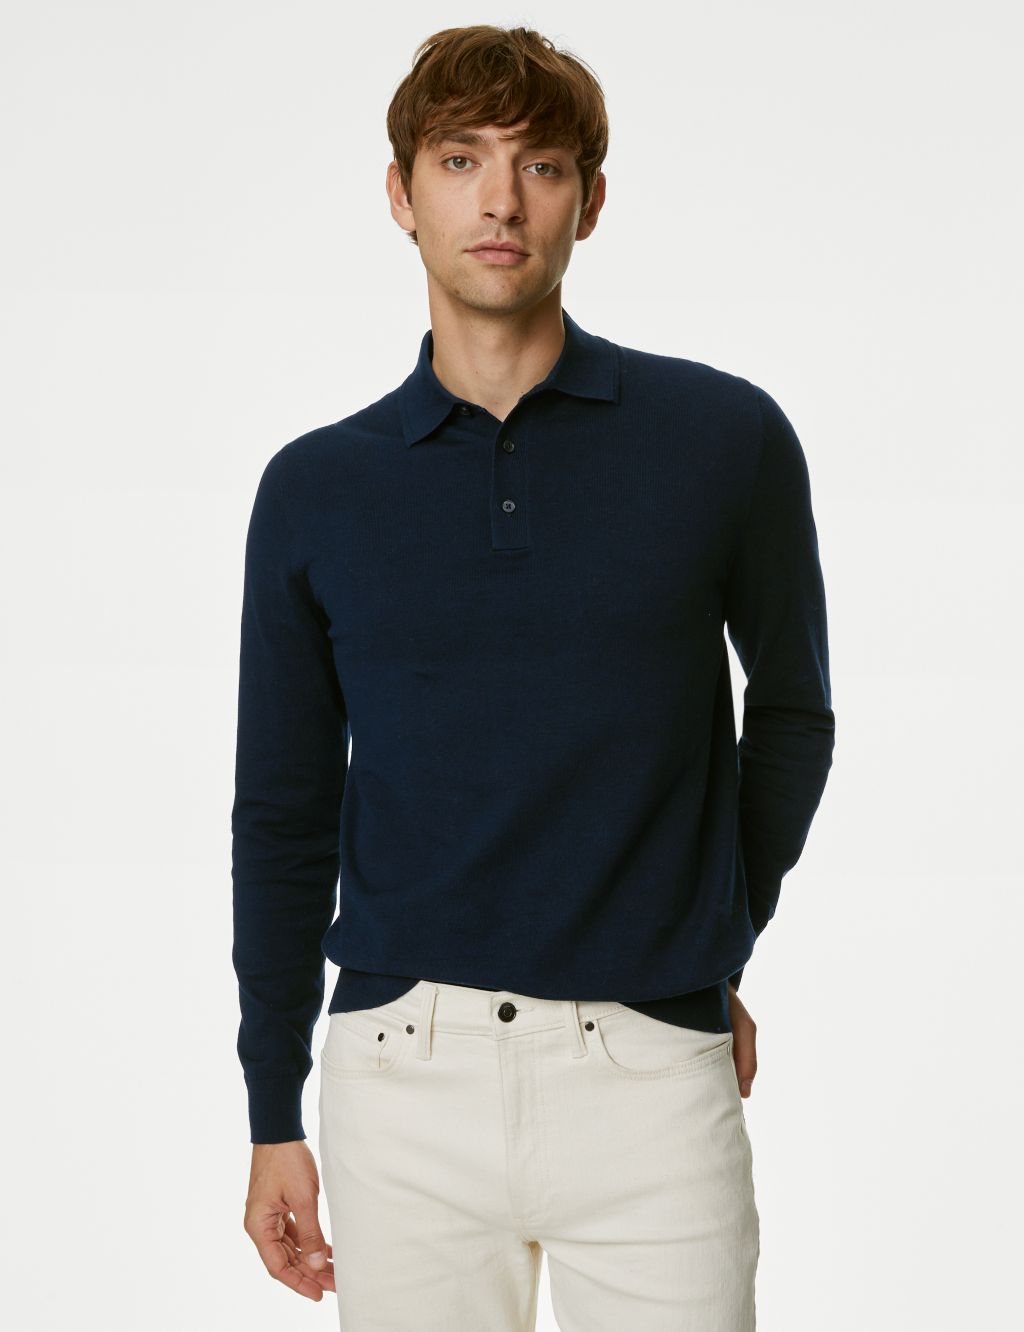 Cotton Rich Tipped Knitted Polo Shirt image 4